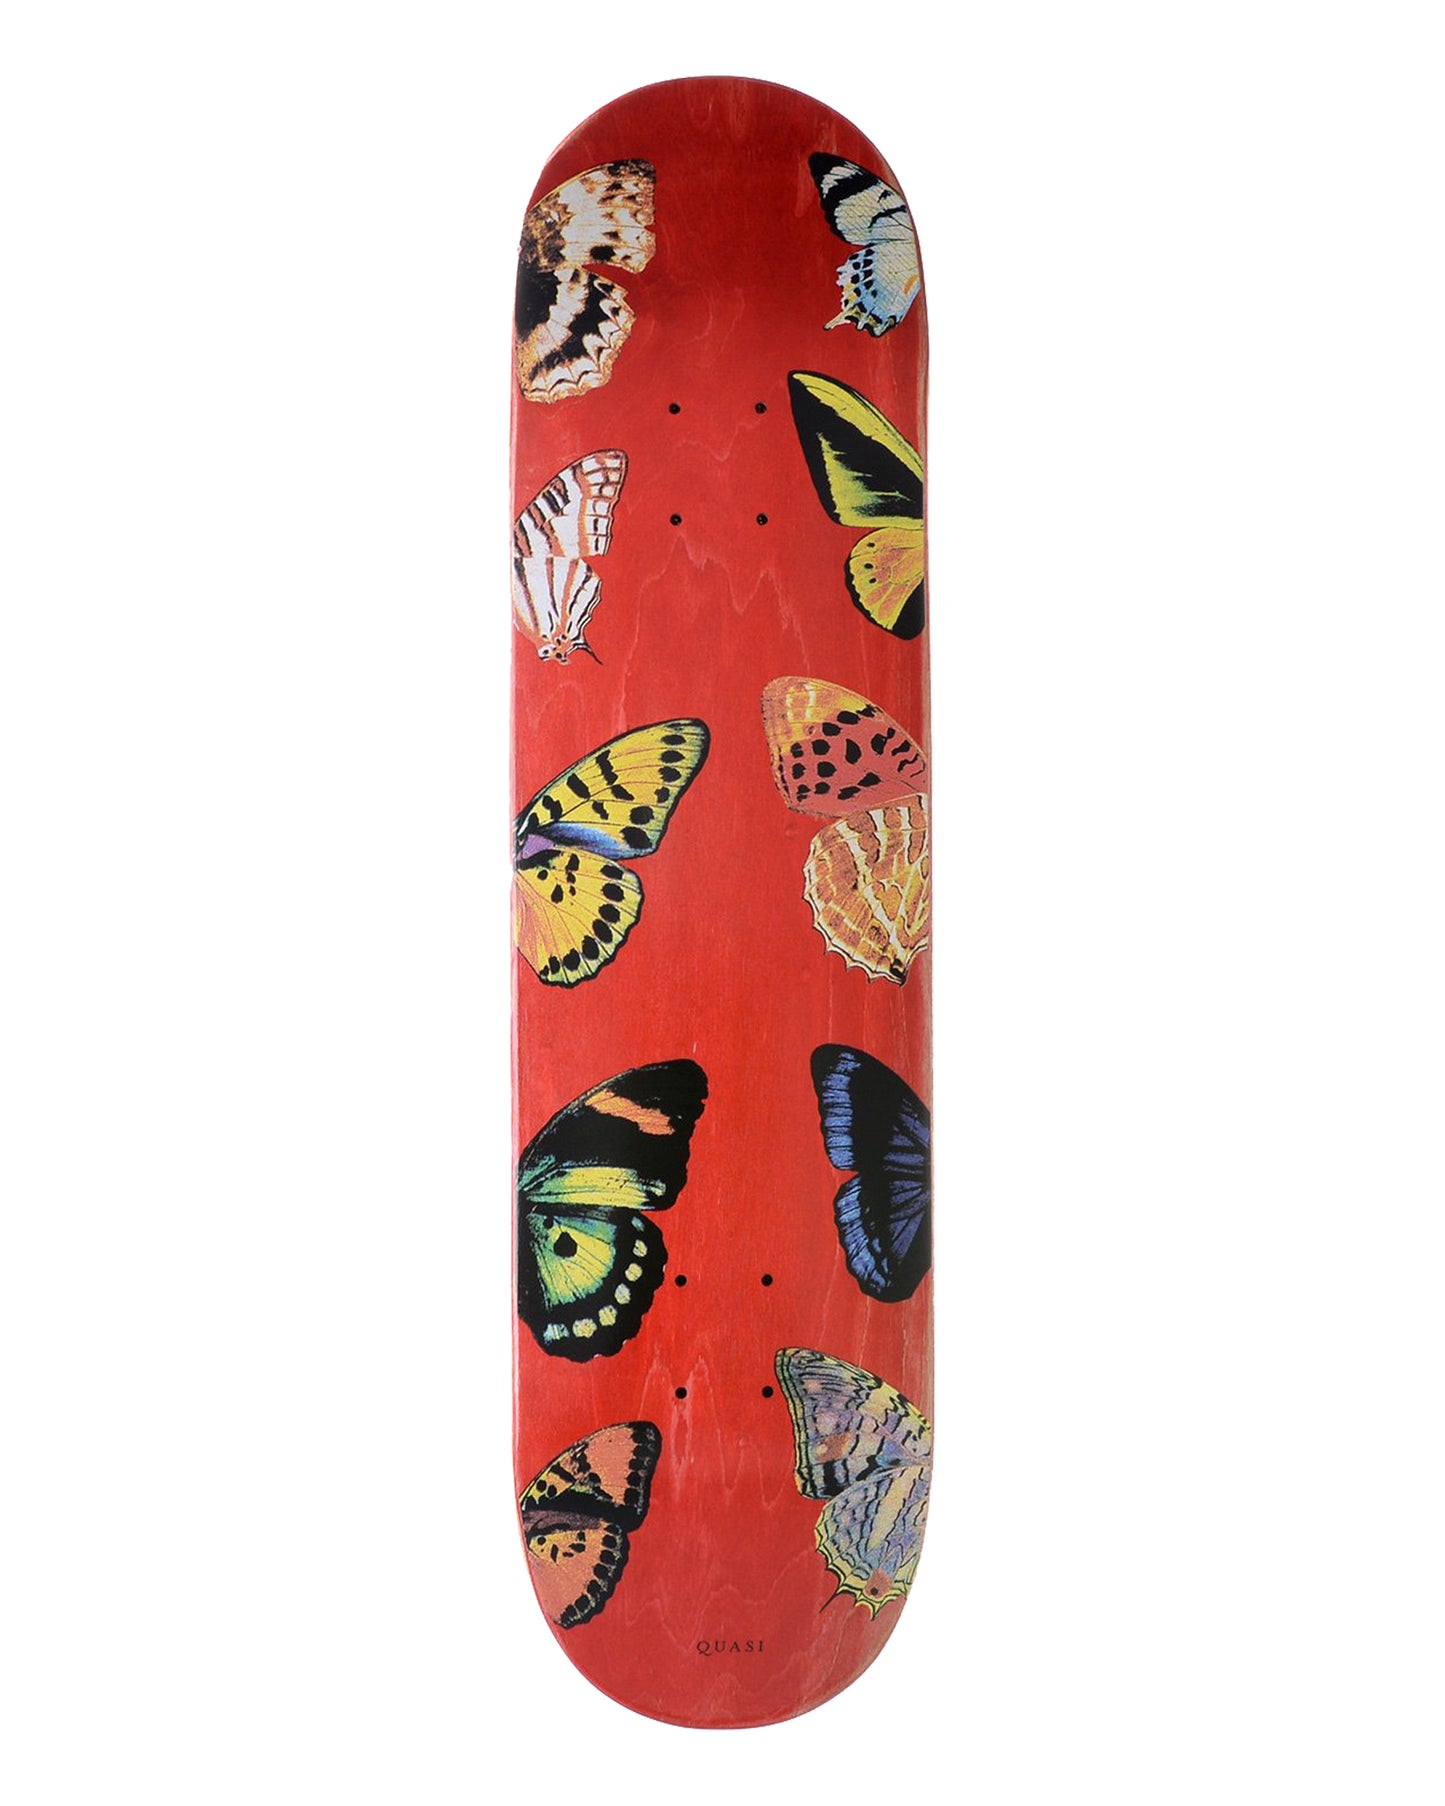 8.0 QUASI BUTTERFLY RED DECK